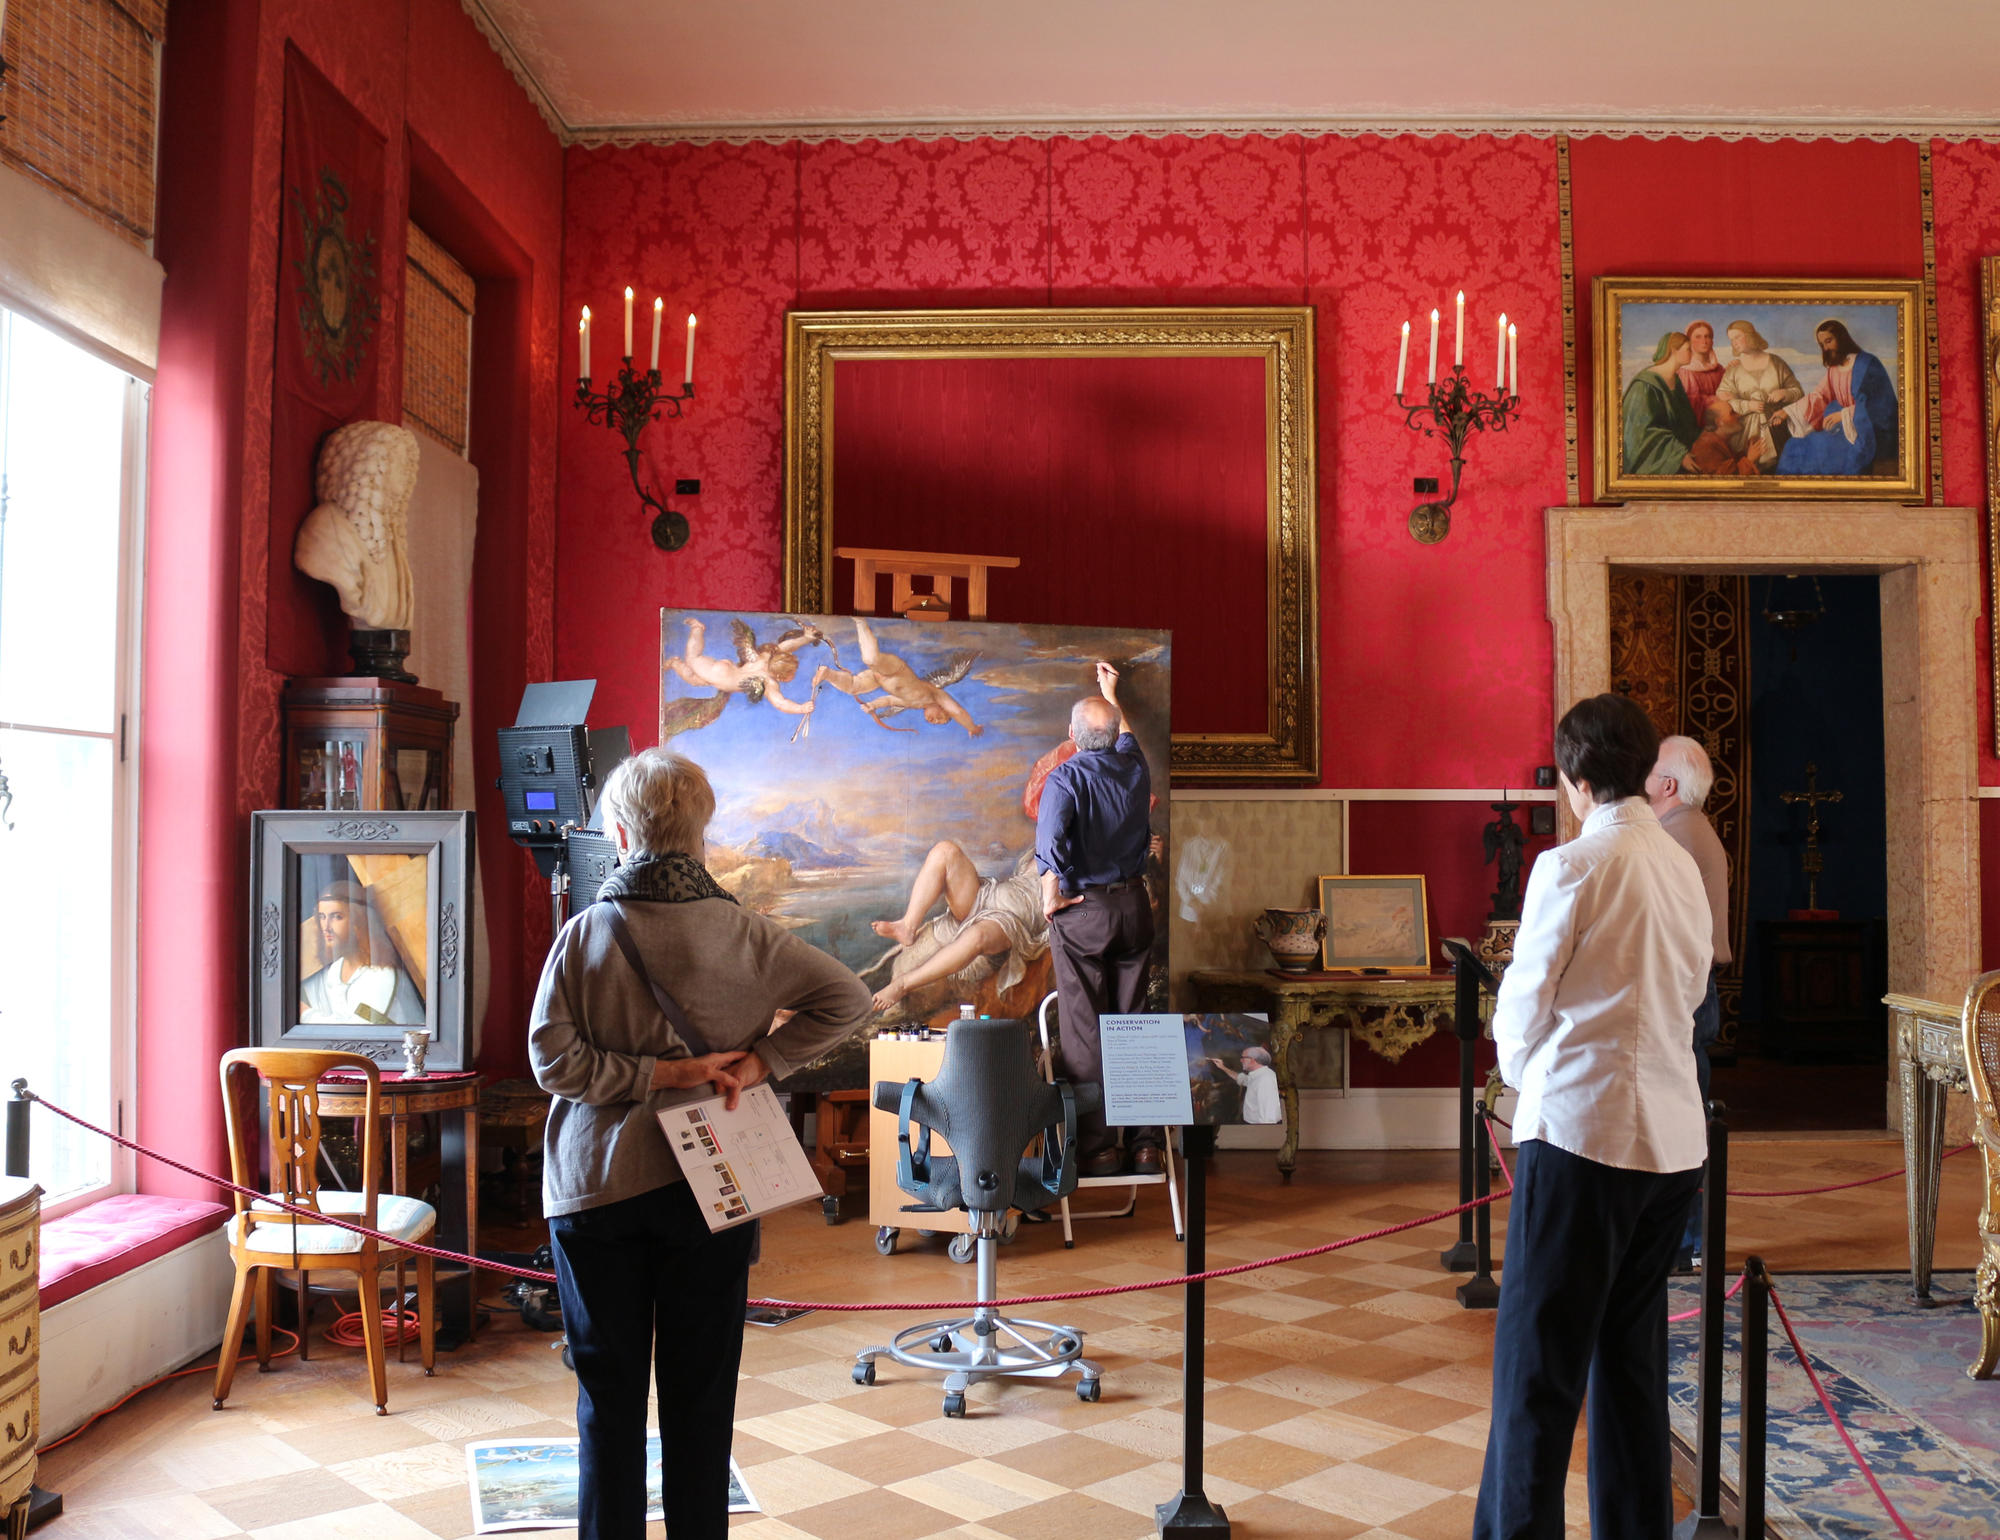 Gianfranco working in the Titian Room, February 27, 2019.